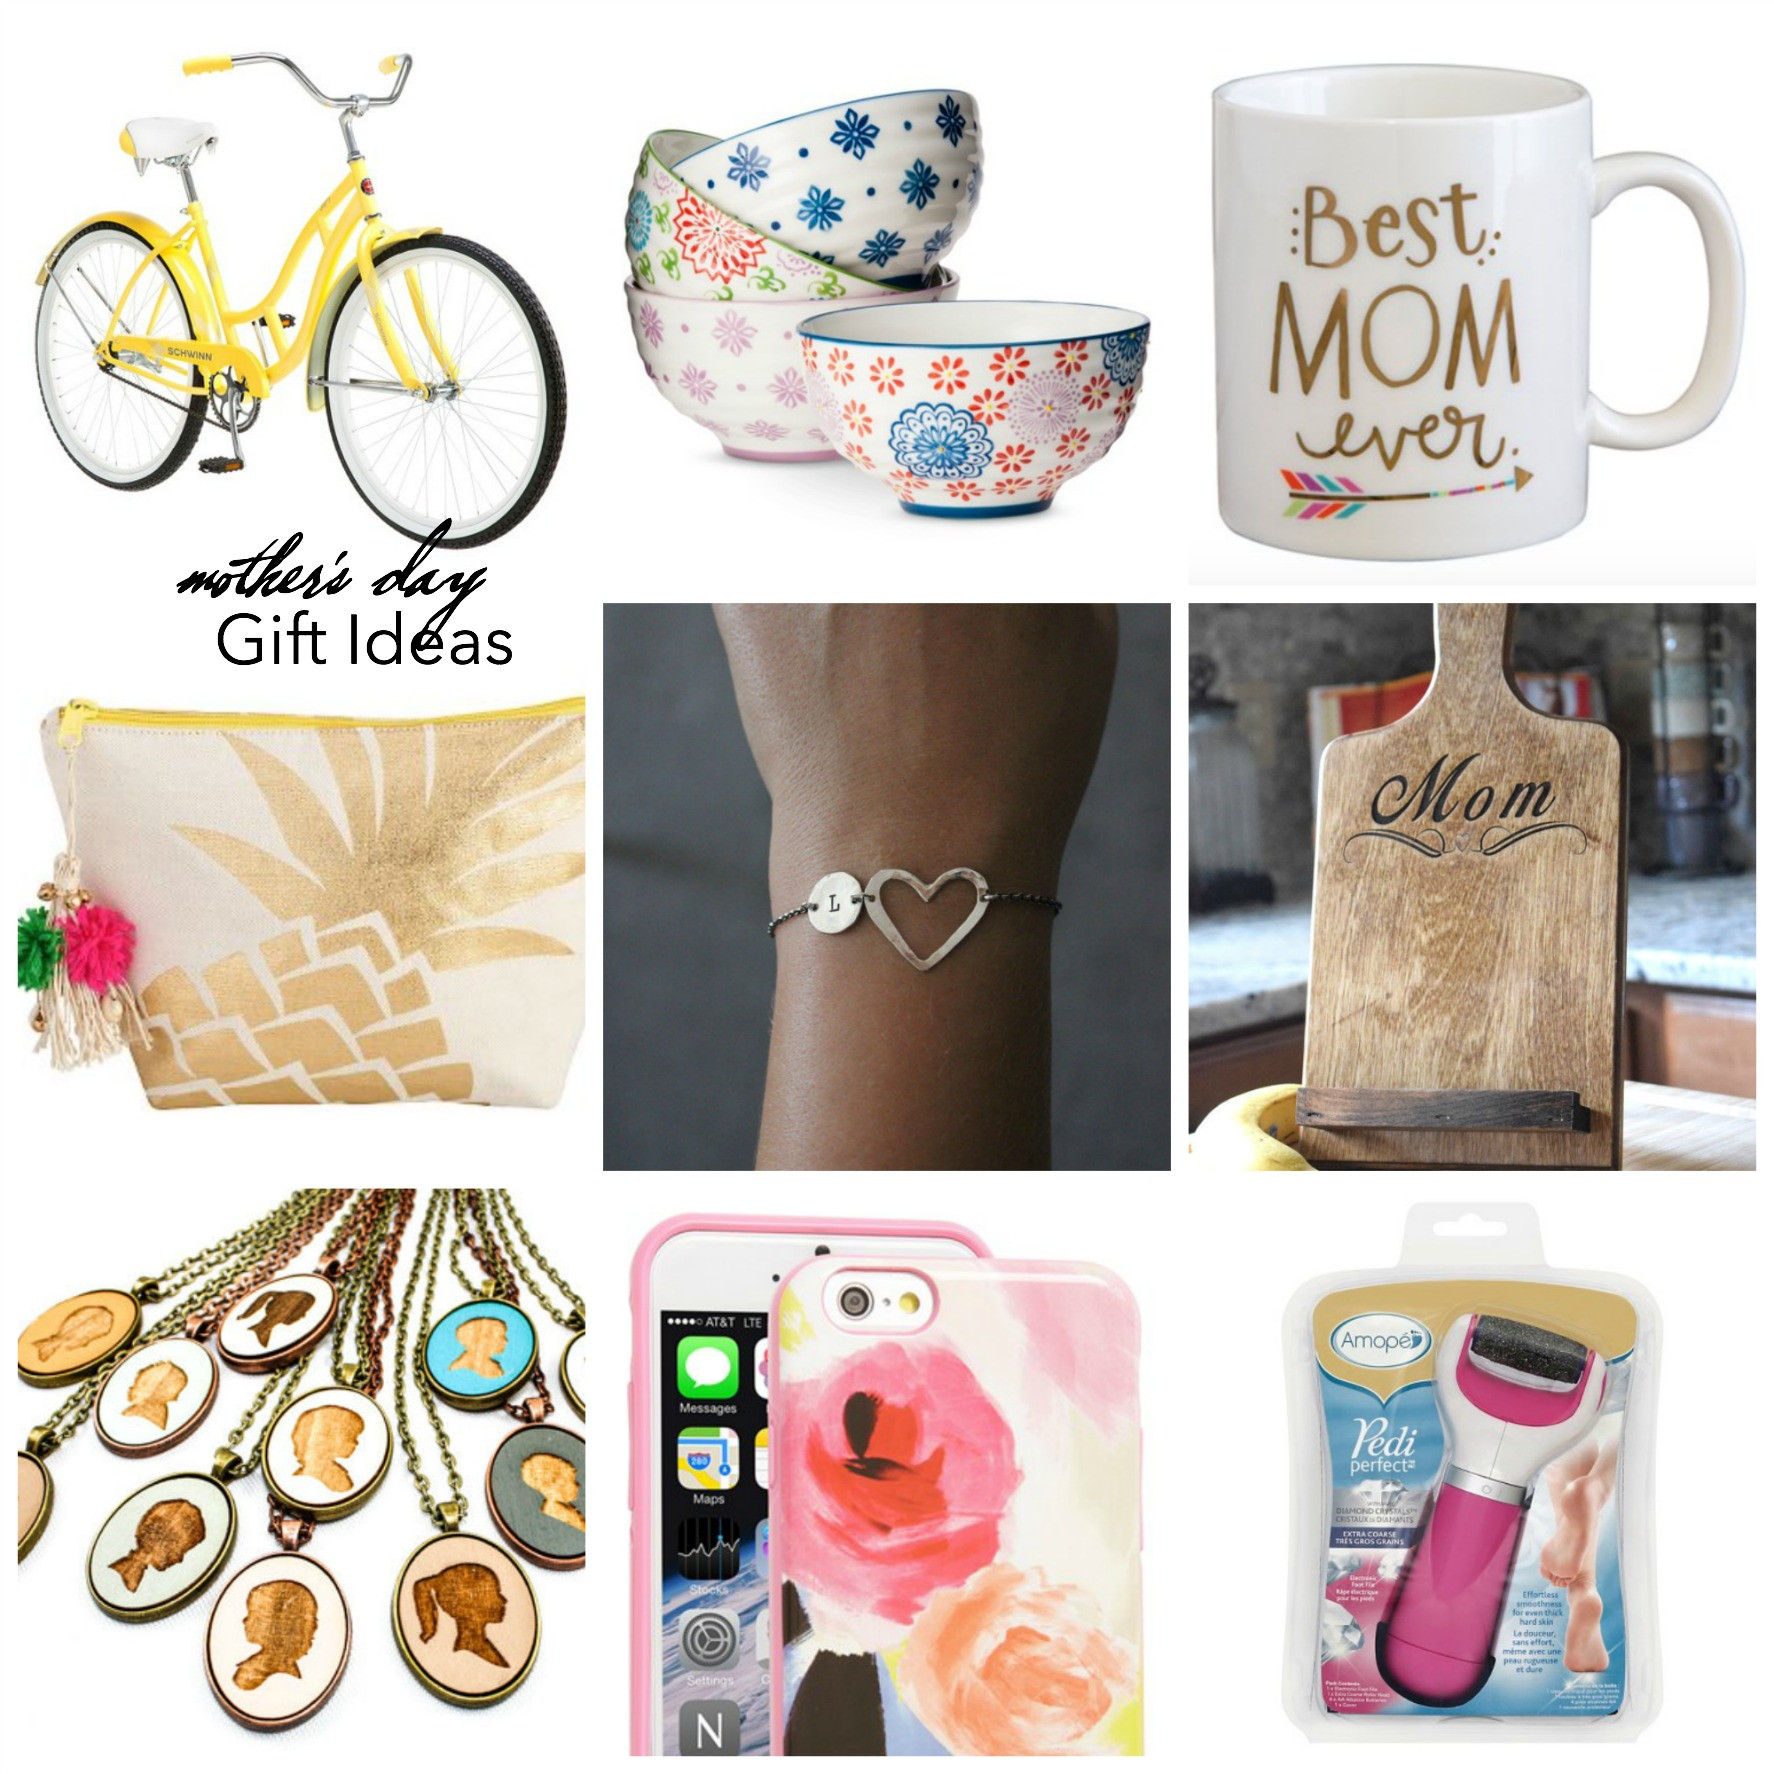 Mothers Day Ideas Gift
 Handmade Mother s Day Gift Ideas The Idea Room